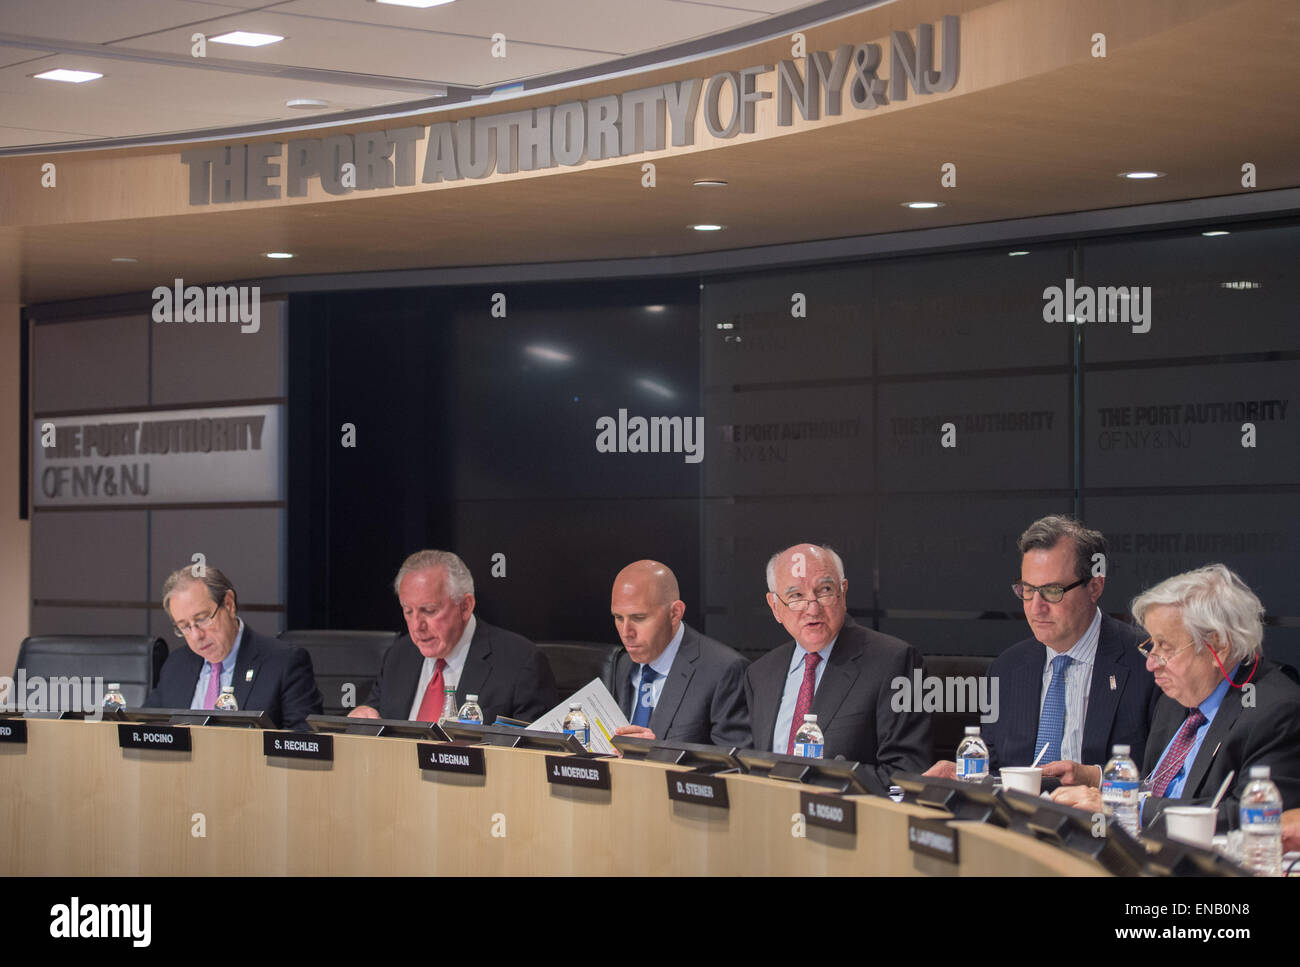 Manhattan, New York, USA. 30th Apr, 2015. The Port Authority of New York and New Jersey meeting of the Board of Commissioners and Board Committee, from left: JEFFREY LYNFORD, RAYMOND POCINO, Vice Chairman SCOTT RECHLER, Chairman JOHN DEGNAN, JEFFREY MOERDLER and DAVID STEINER, 4 World Trade Center, Thursday, April 30, 2015. This monthly board meeting is the first held at the World Trade Center site since shortly before the Sept. 11 attacks. Credit:  Bryan Smith/ZUMA Wire/Alamy Live News Stock Photo